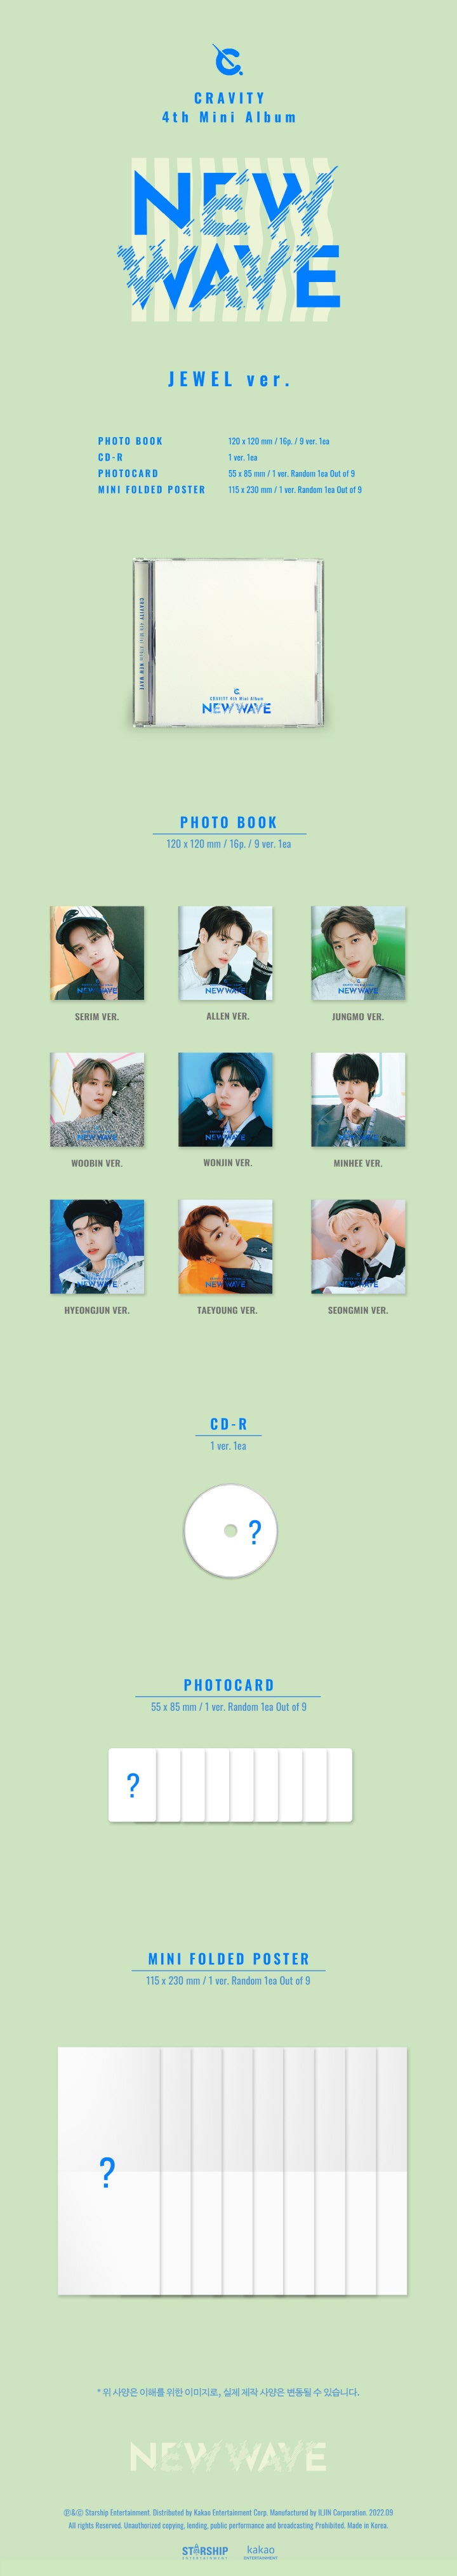 1 CD
1 Photo Card (random out of 9 types)
1 Mini Folded Poster (random out of 9 types)